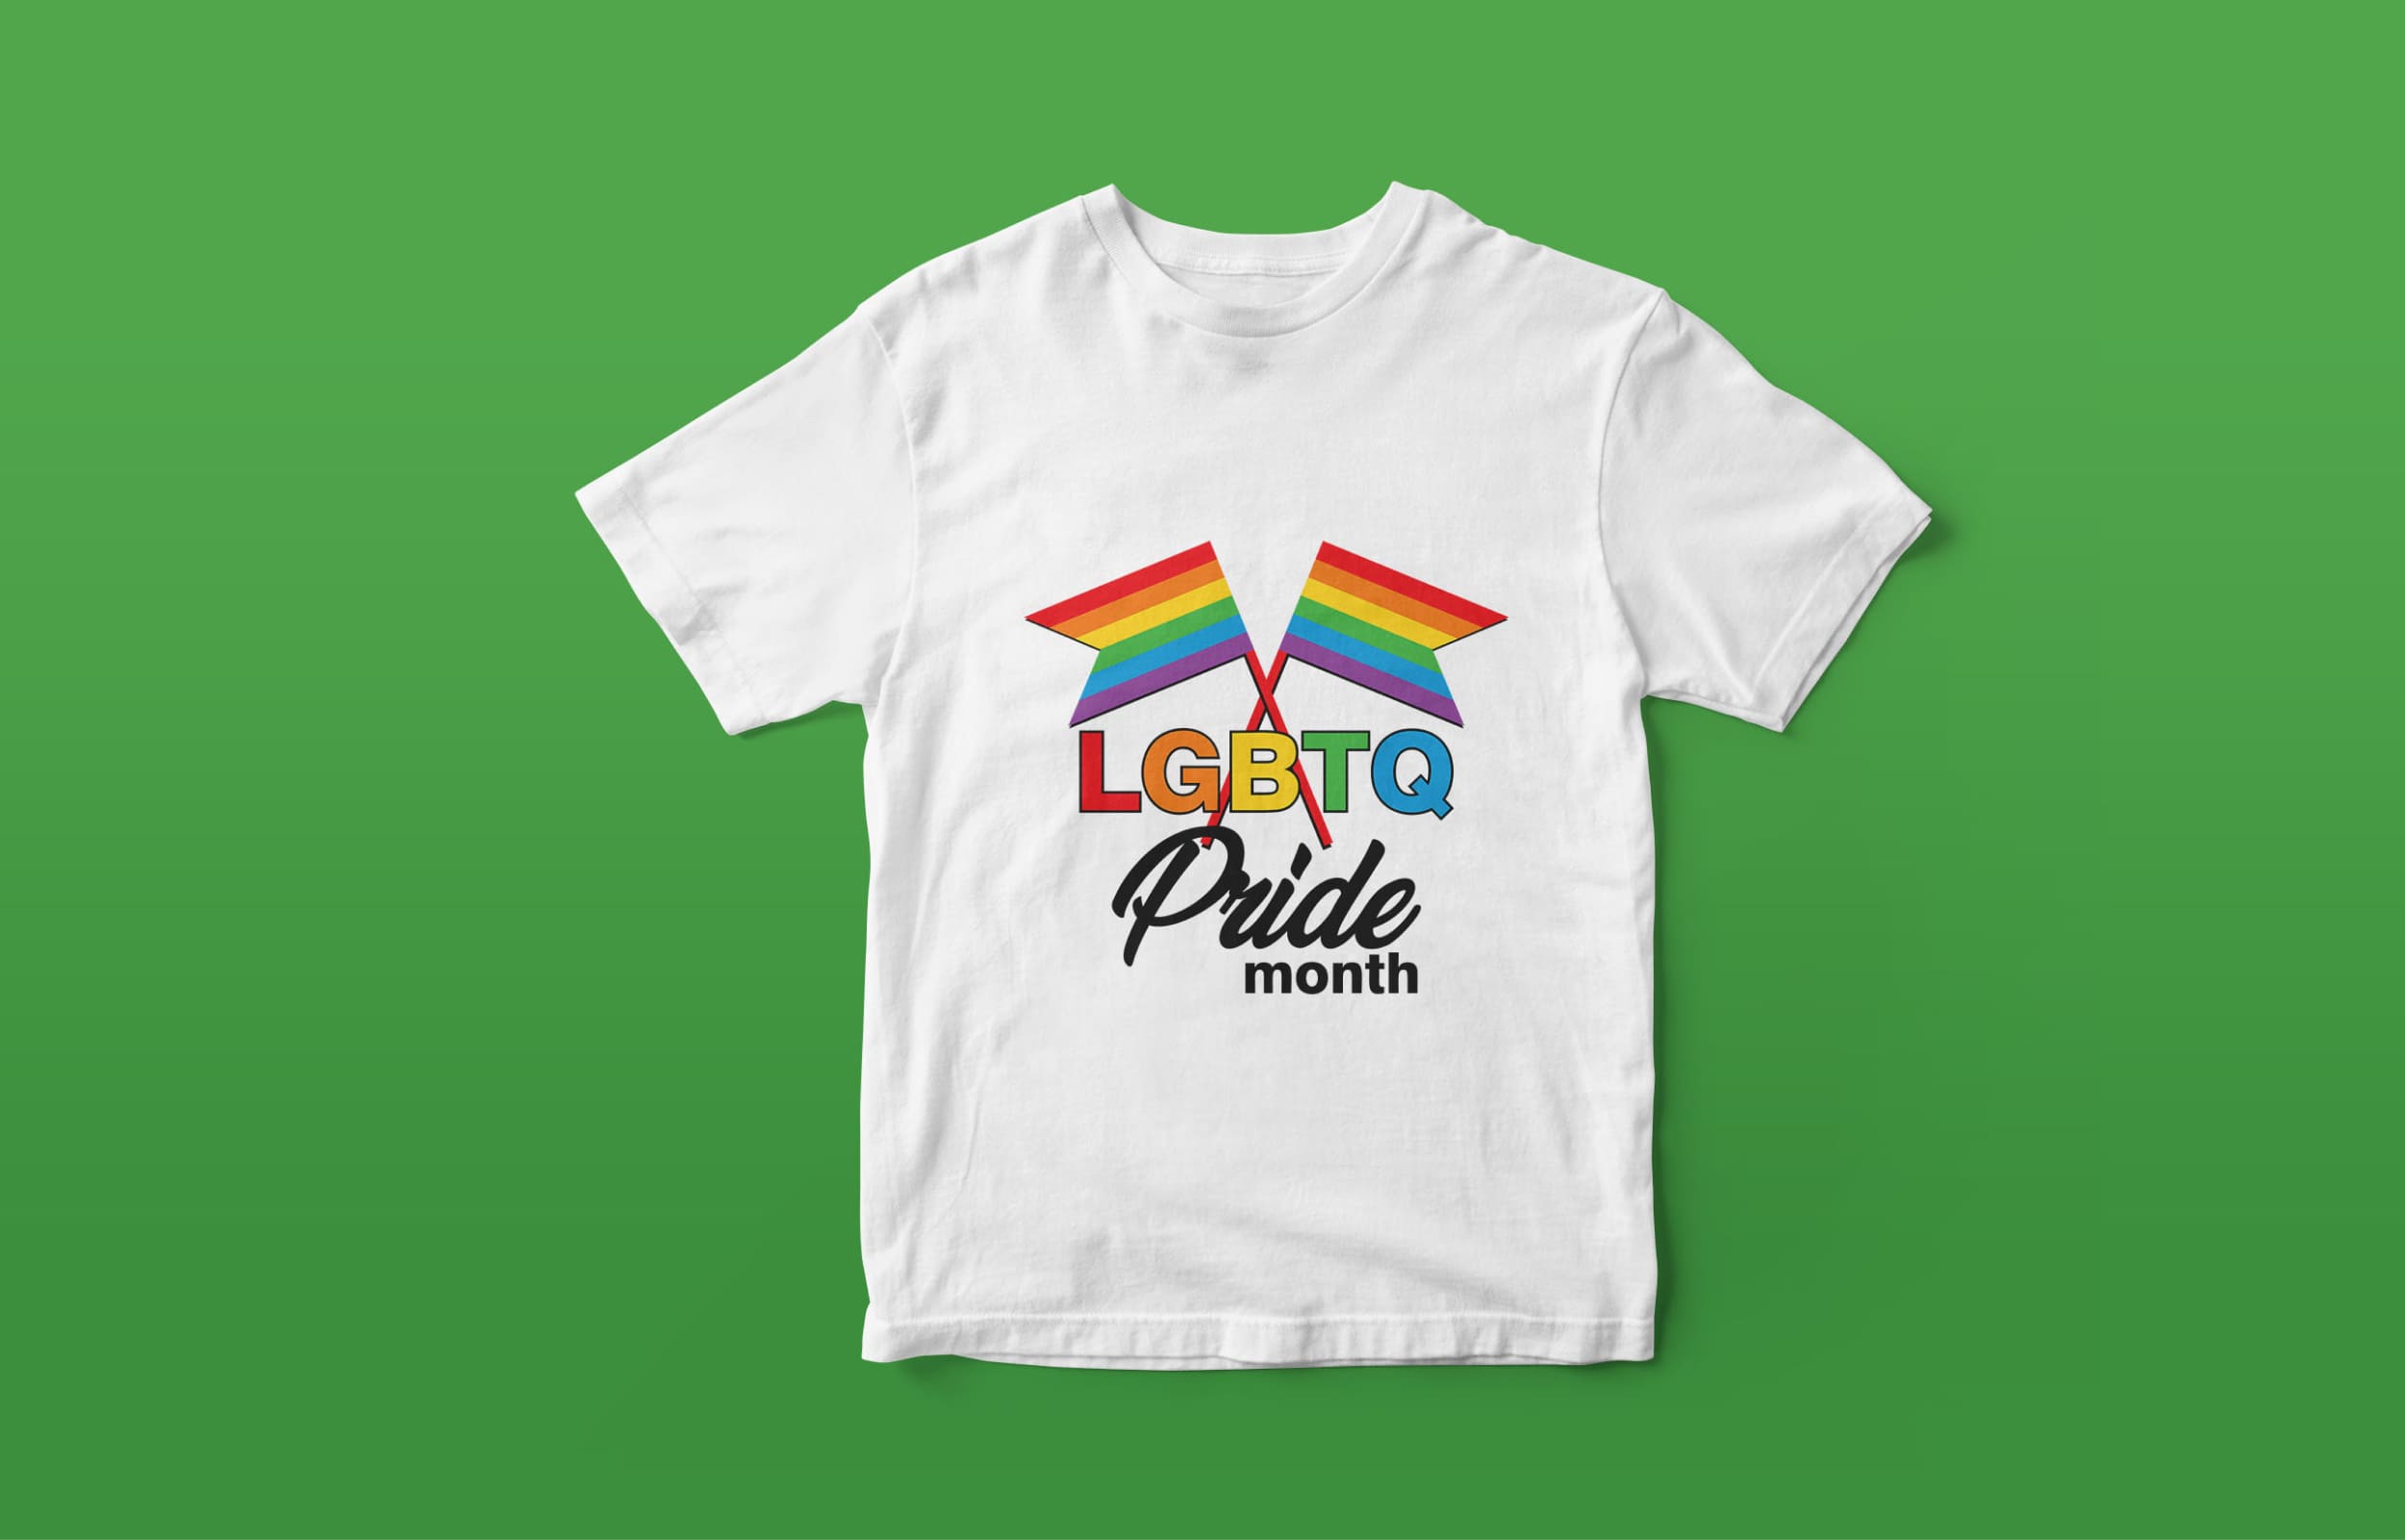 A white t-shirt with two flags LGBT, the lettering "LGBTQ" in LGBT colors and the black lettering "Pride month" on a green background.